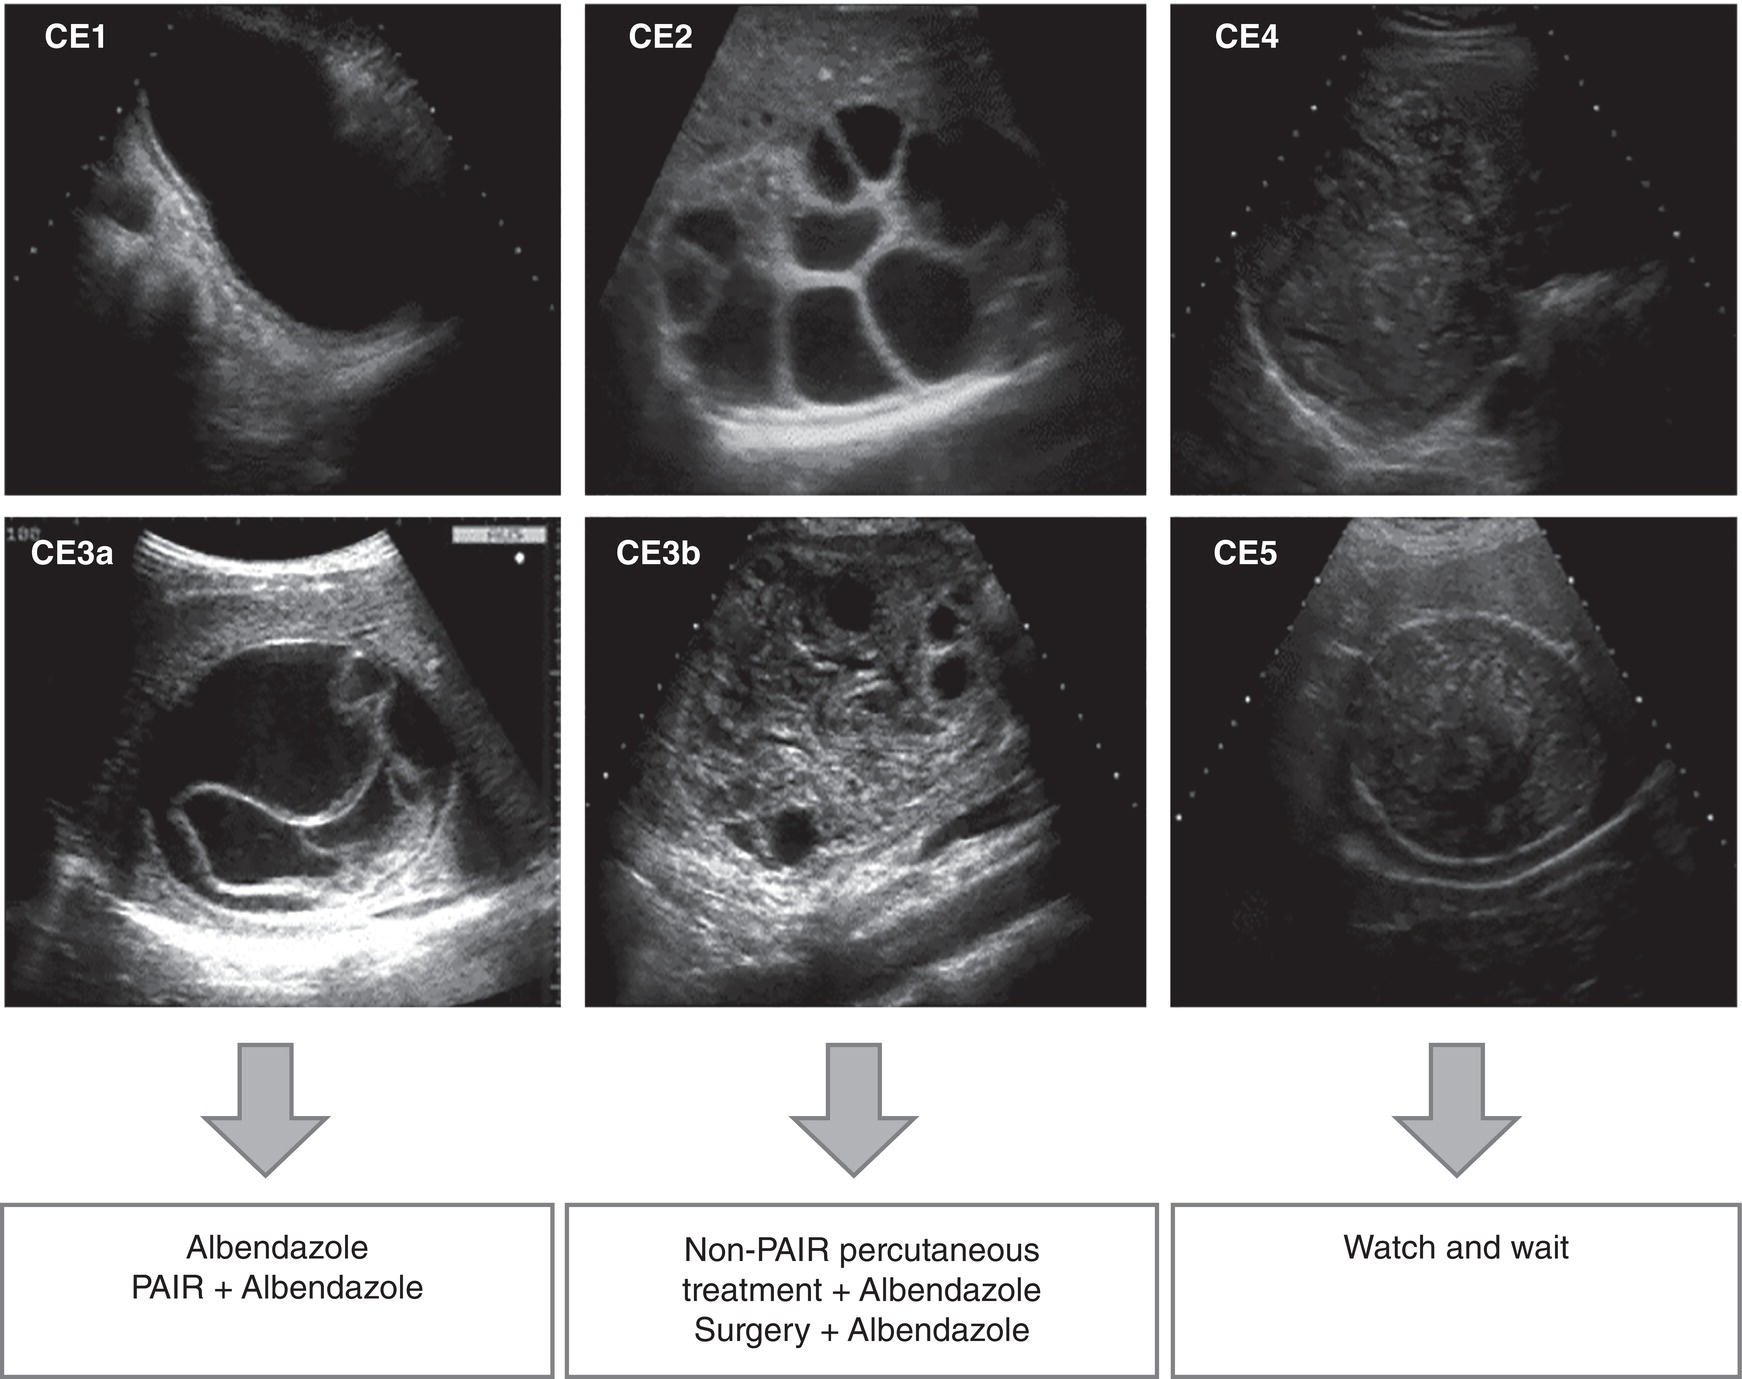 Six ultrasound scan images are arranged in two rows and three columns. They are titled as follows. C E 1, C E 2, C E 3, C E 4, C E 3a, C E 3b, C E 5. Below the first column labeled Albendazole P A I R + Albendazole. Below the second column labeled Non-P A I R percutaneous treatment + Albendazole Surgery + Albendazole. Below the third column labeled watch and wait.